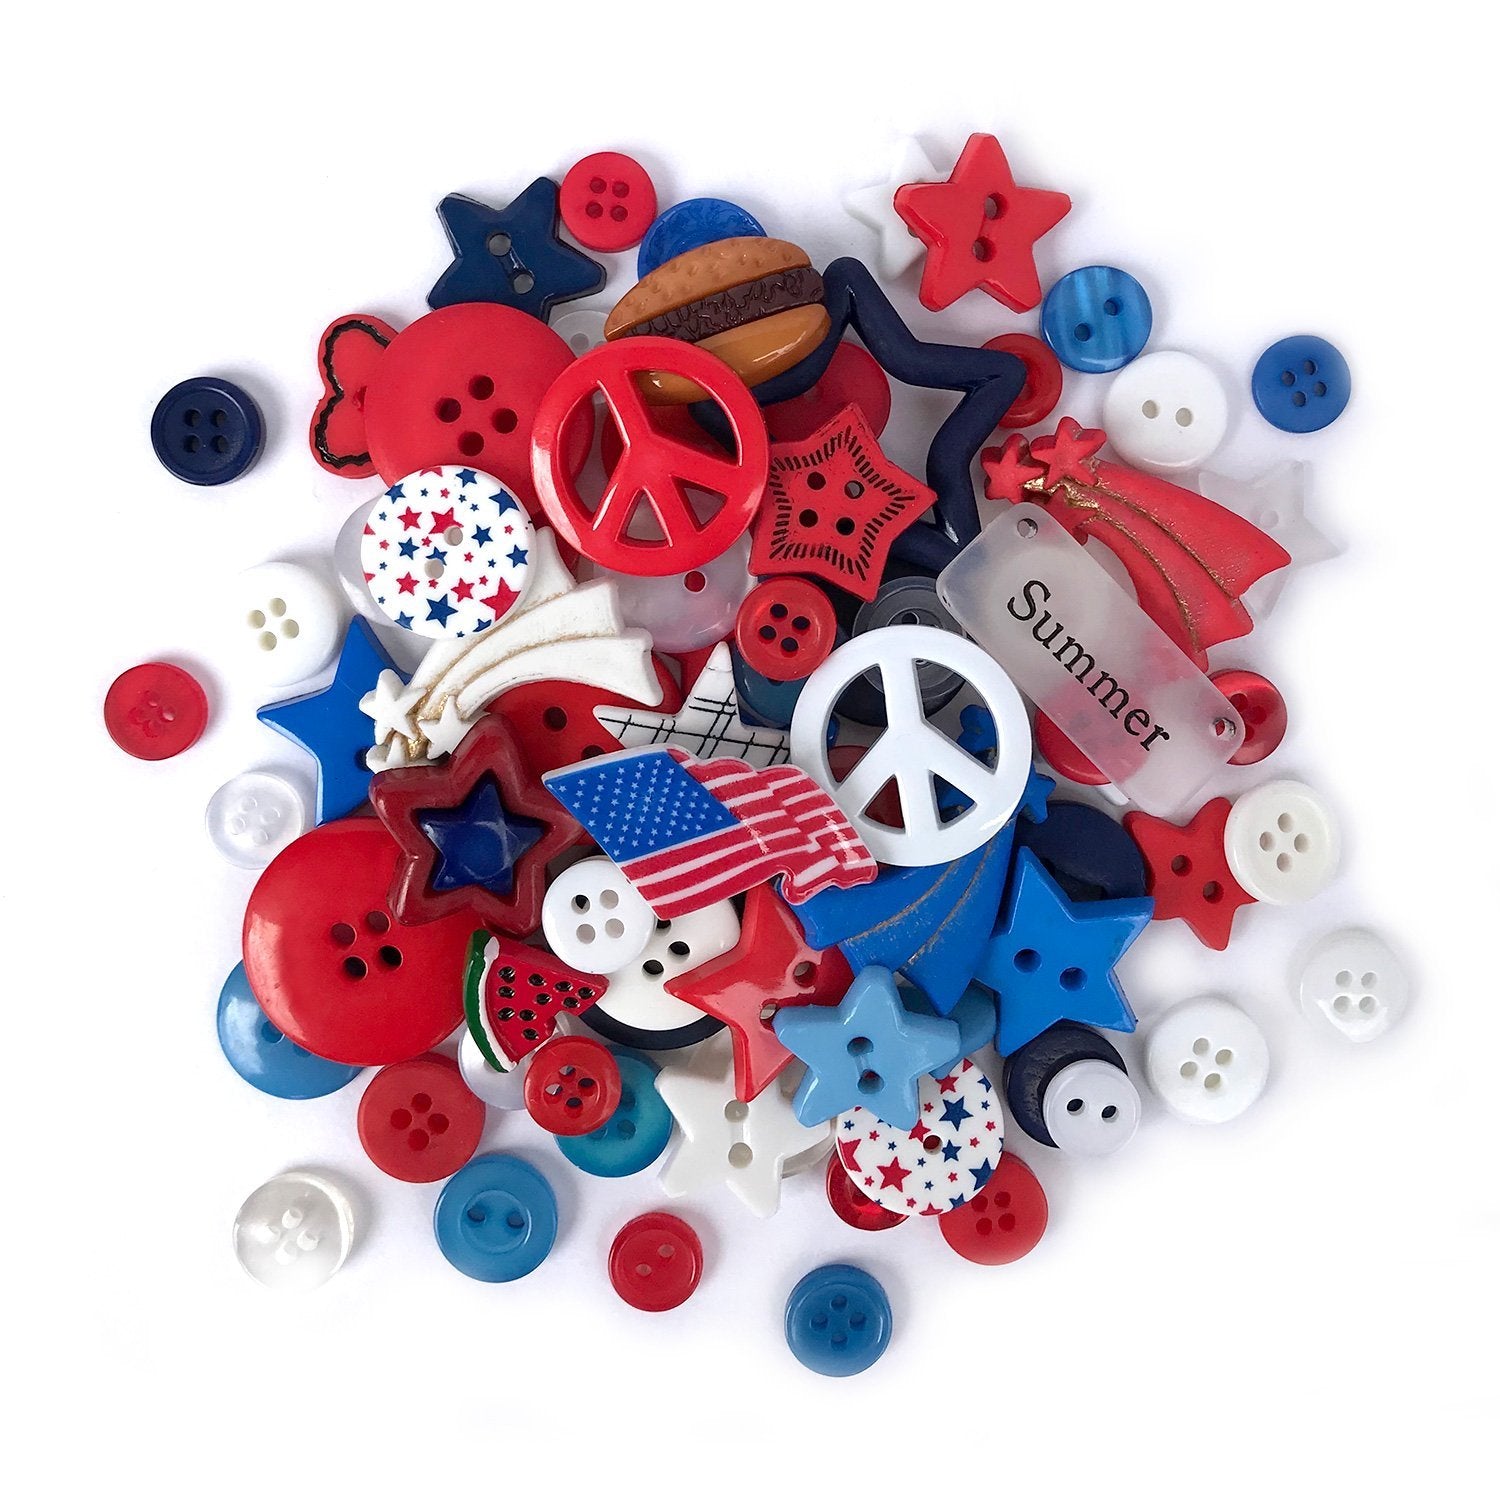 12 Pack: Craft Cover Button Kit by Loops & Threads®